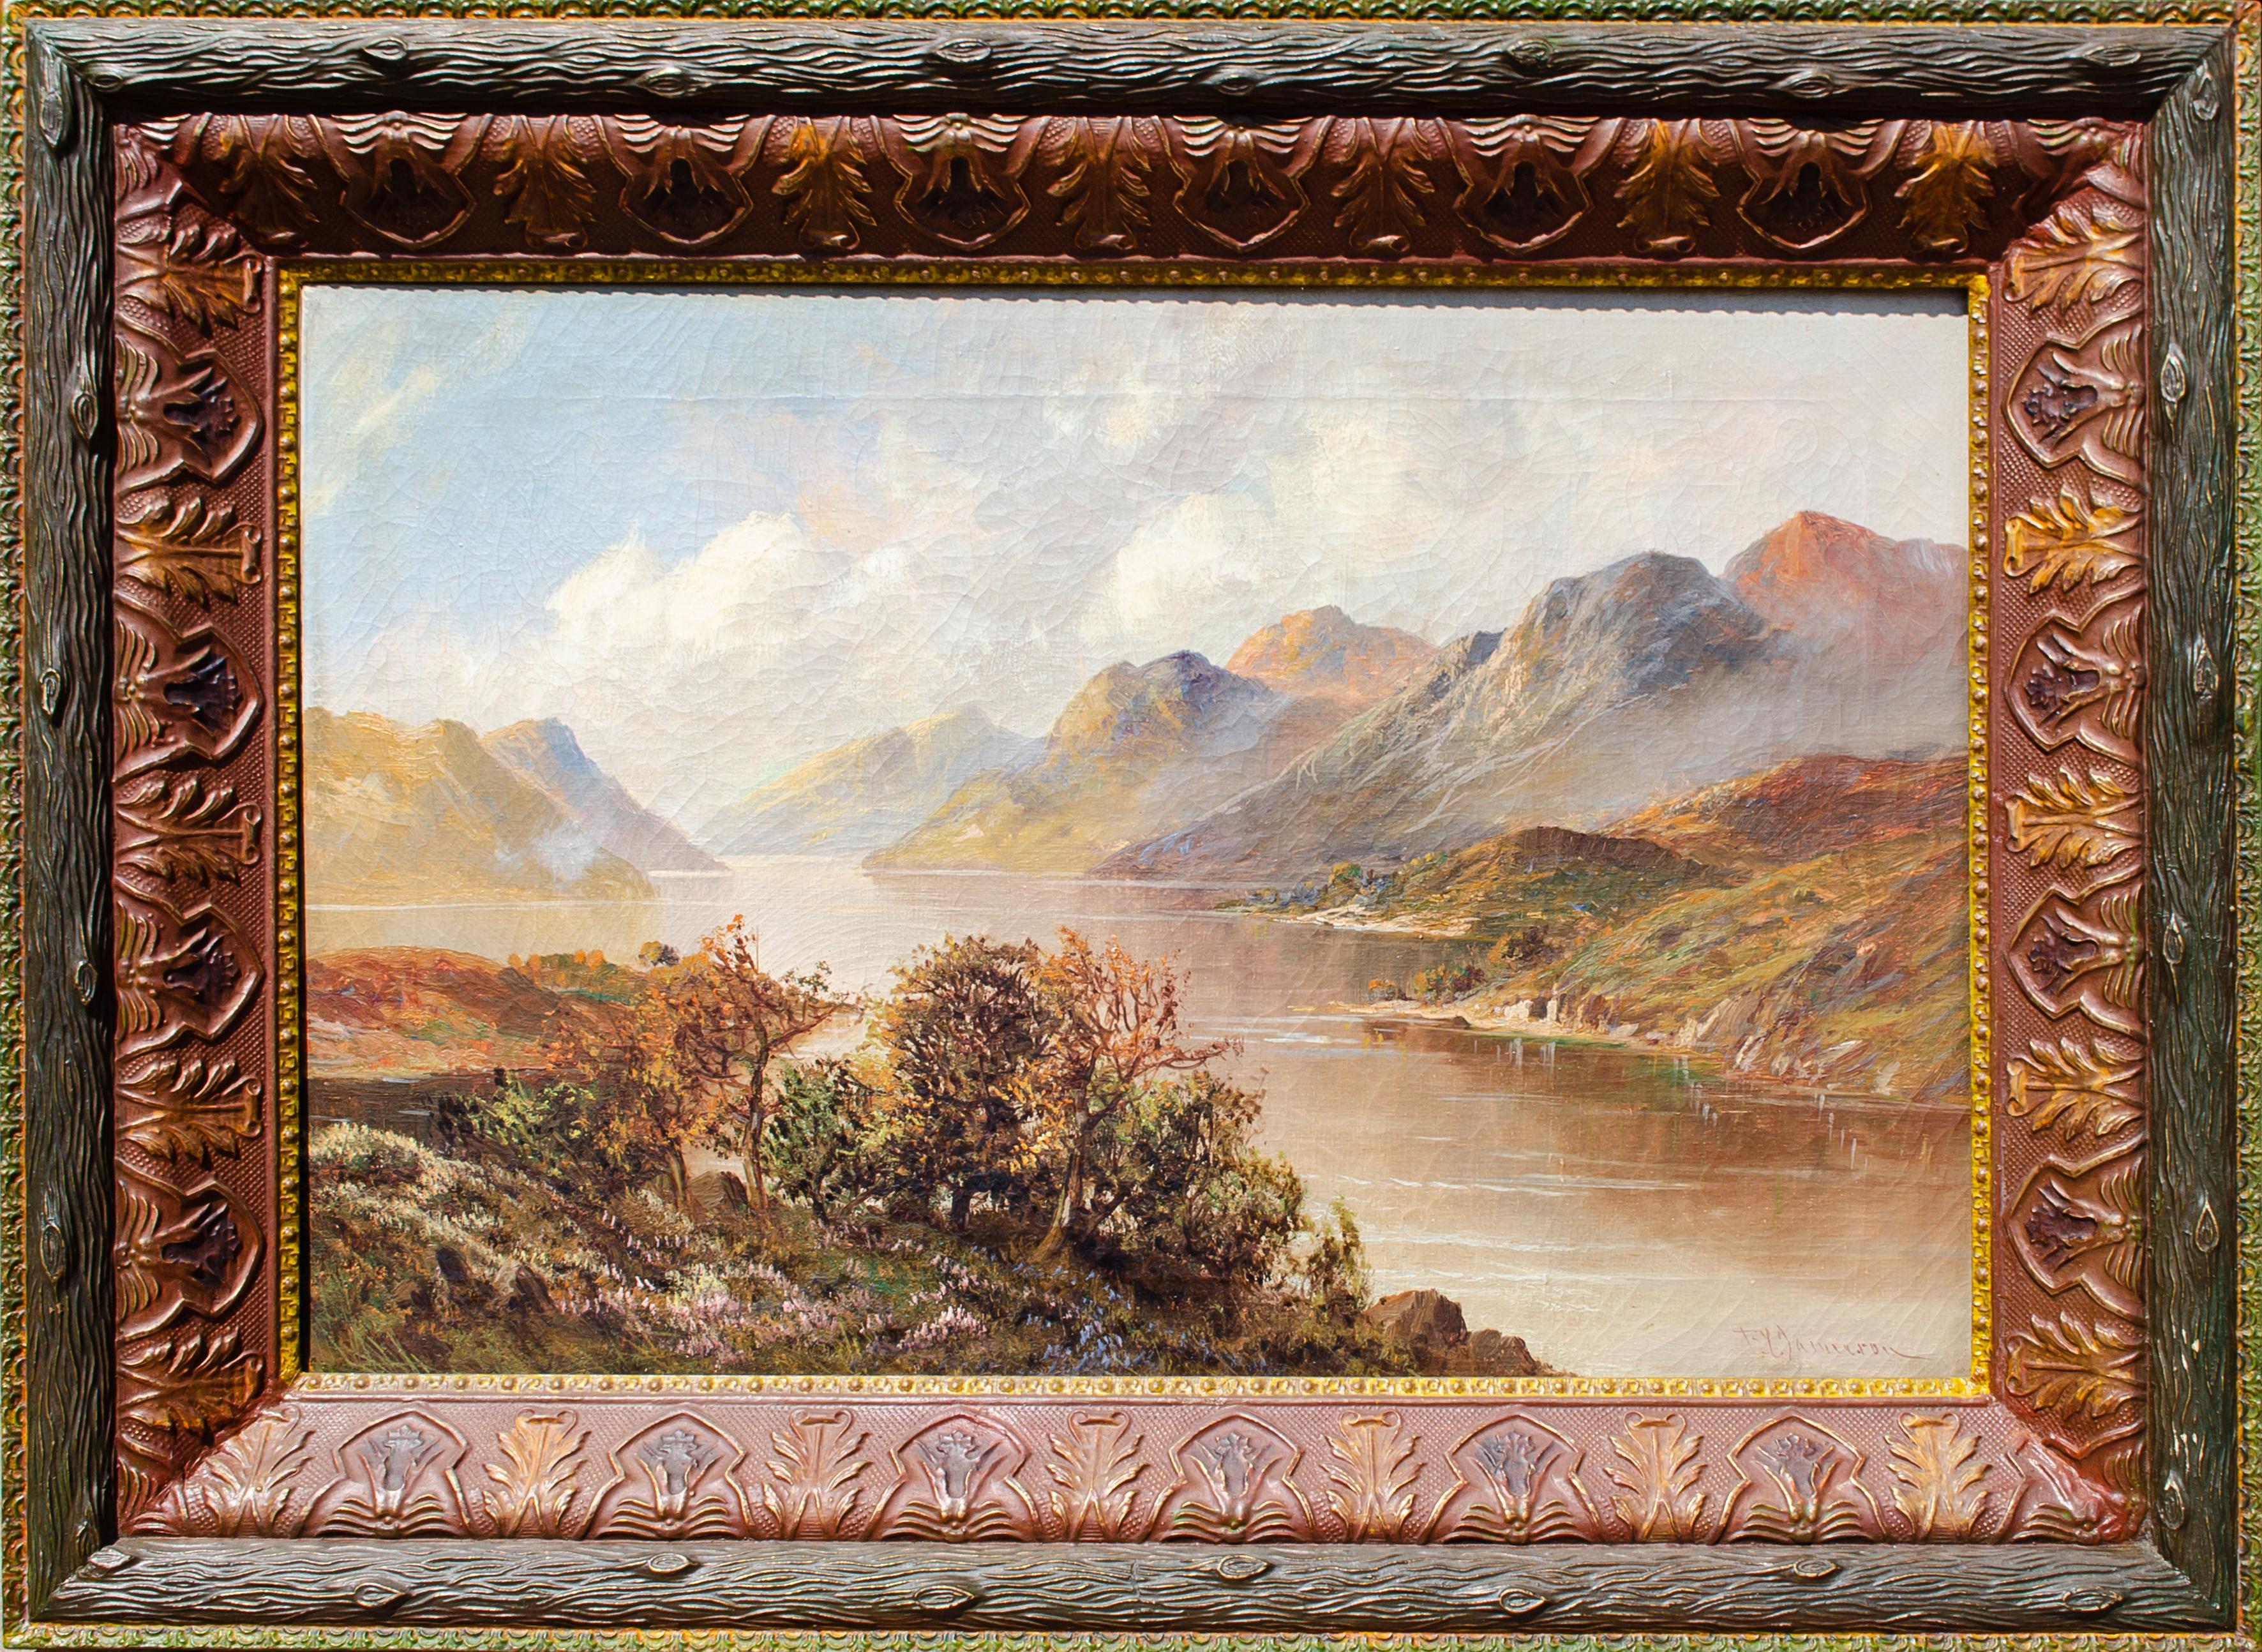 Unknown Landscape Painting - Hudson River School Style Painting, c. 1900